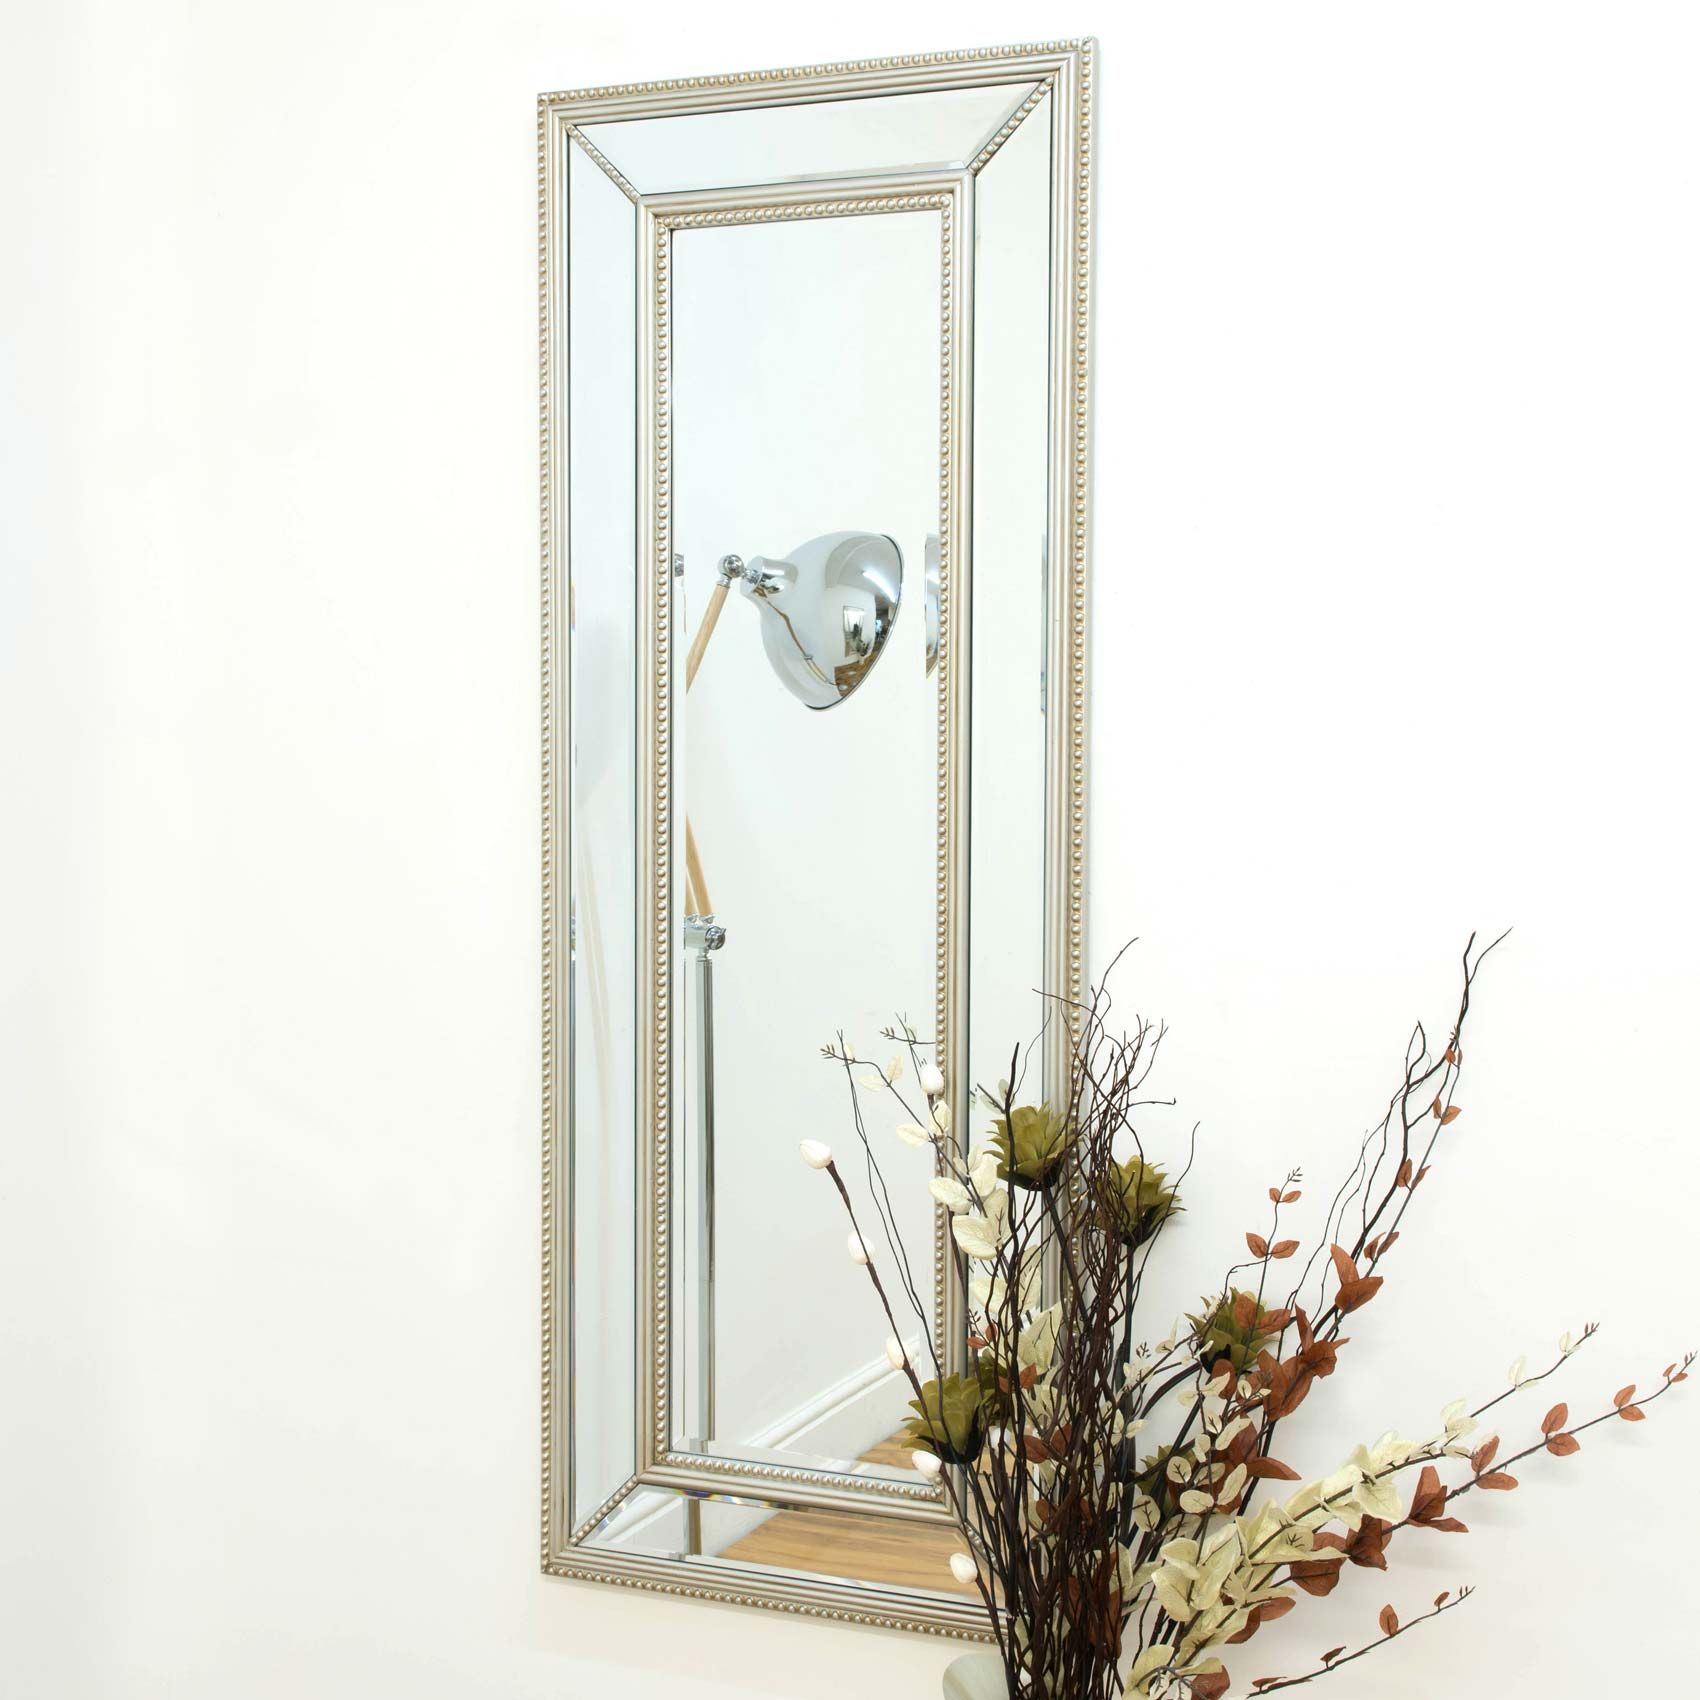 Large Silver Beaded Edge Modern All Glass Wall Mirror 4ft11 X 1ft11 Inside Silver Beaded Square Wall Mirrors (View 4 of 15)